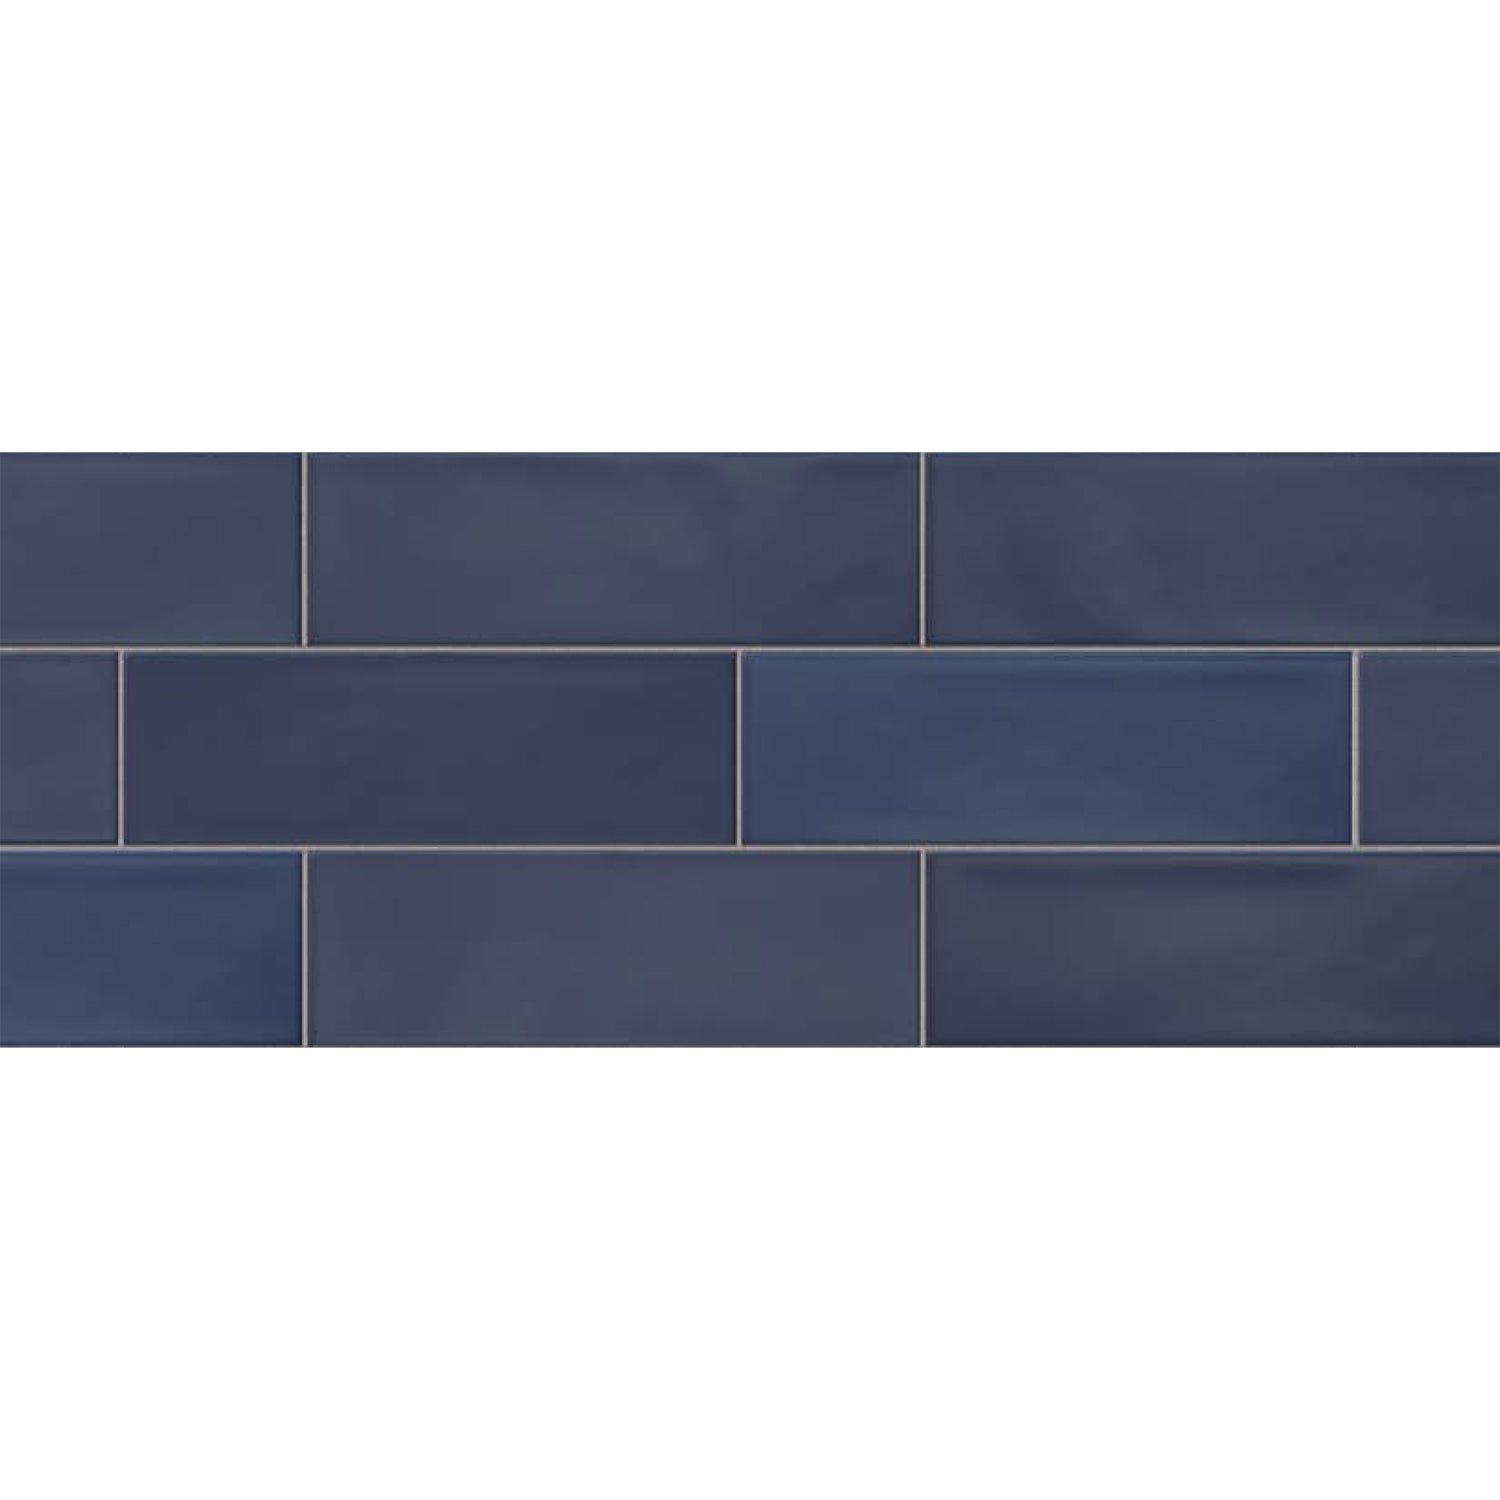 Topcu - Chalky - 2.5 in. x 8 in. Ceramic Wall Tile - Deep Blue